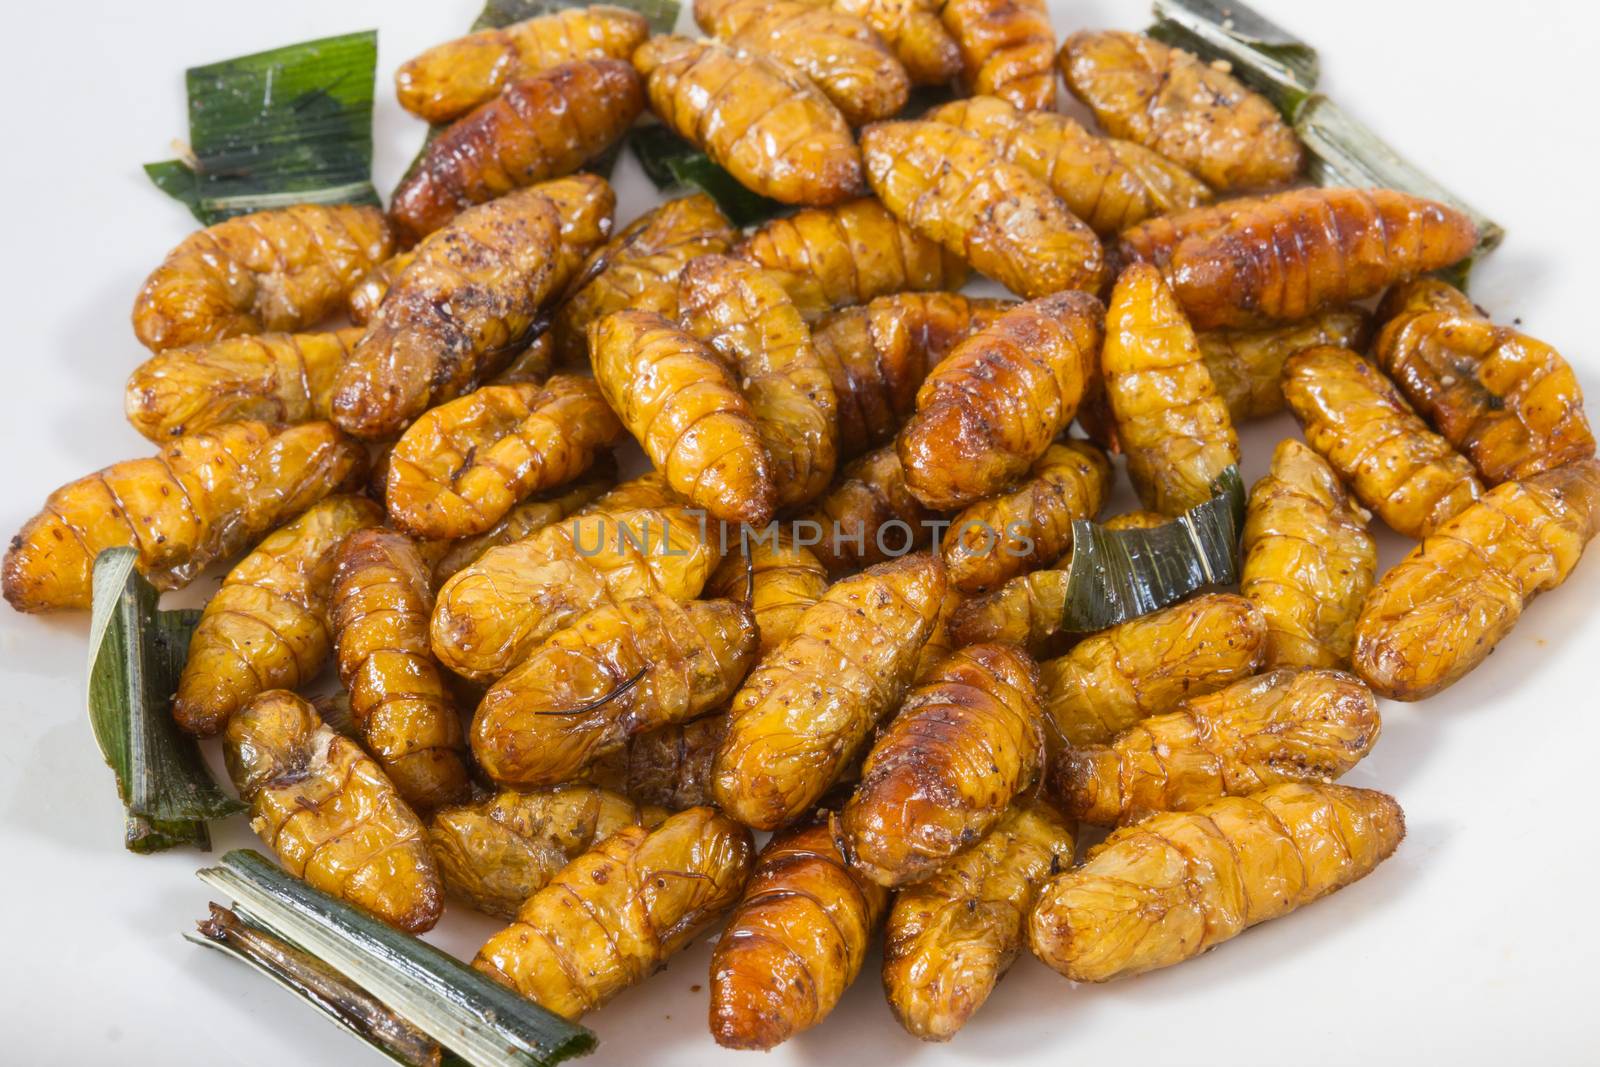 Fried insects. Protein rich food